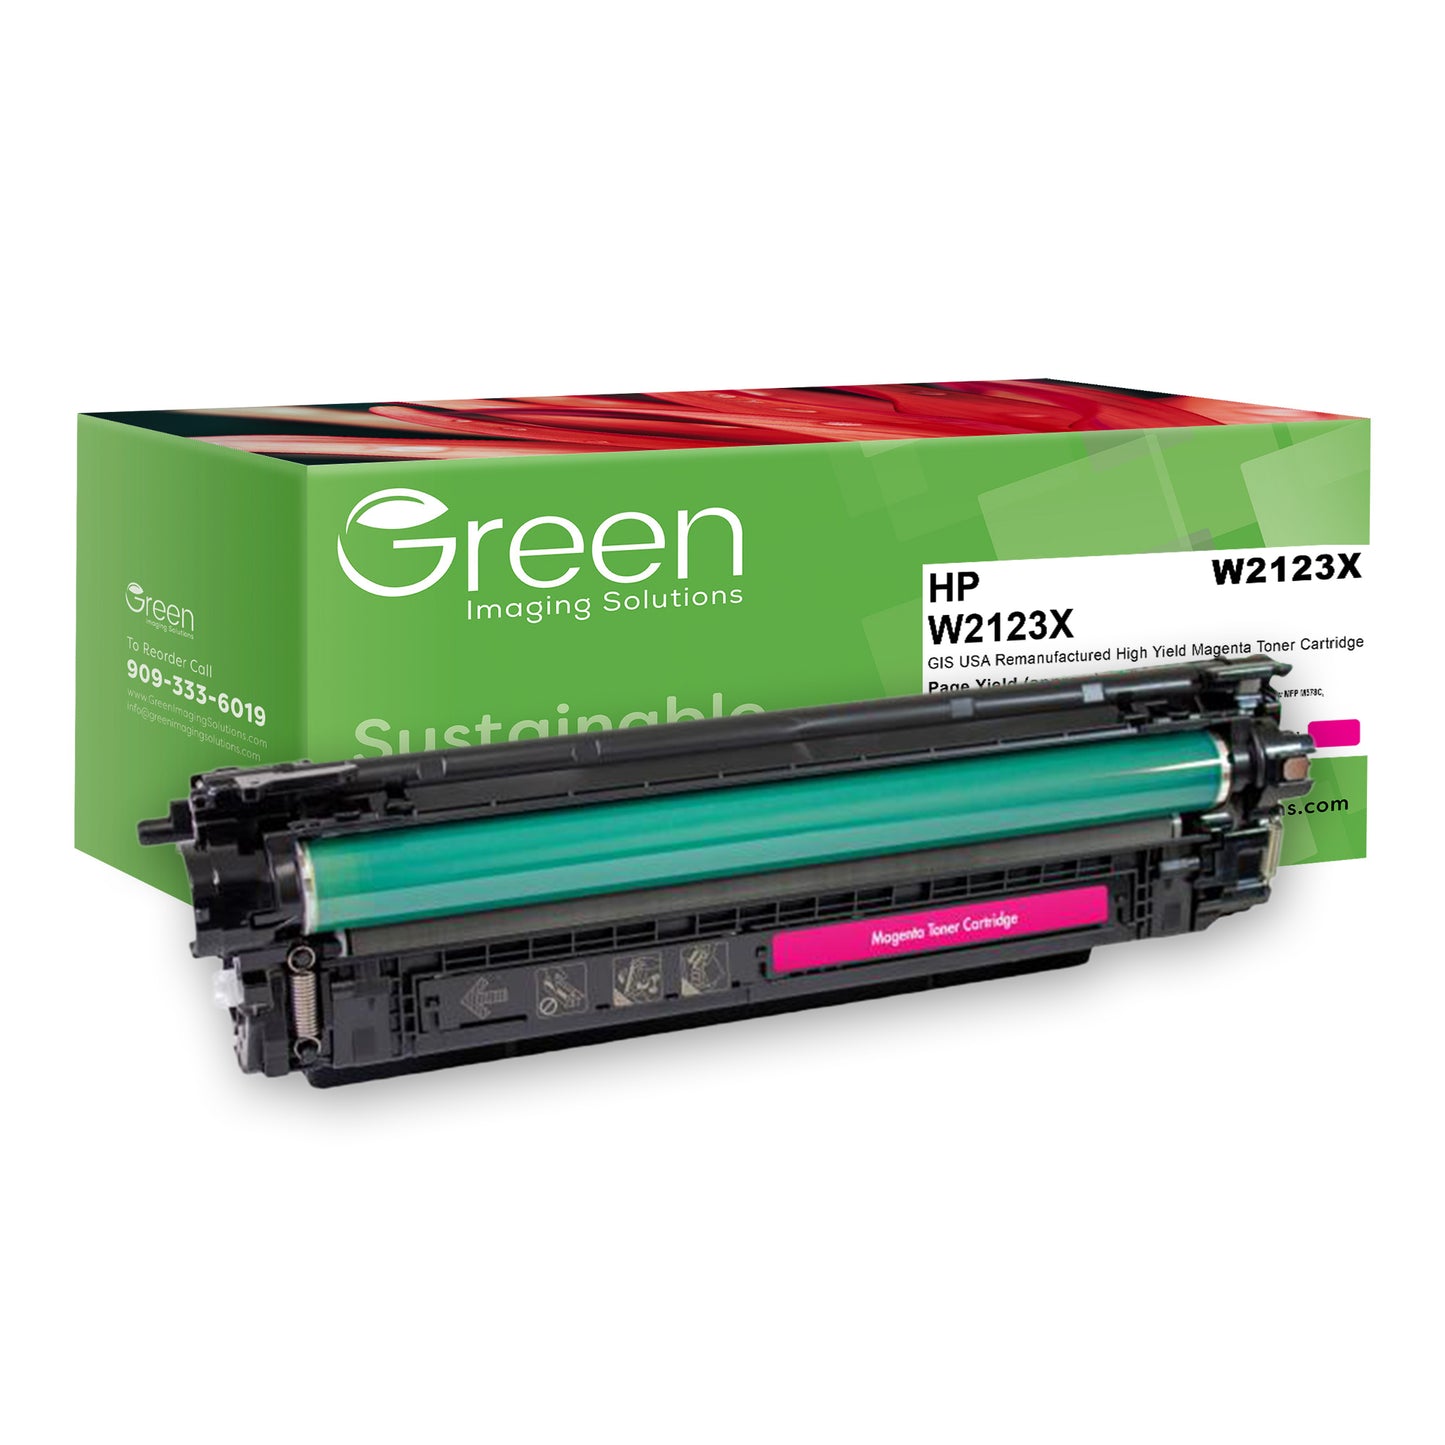 Green Imaging Solutions USA Remanufactured High Yield Magenta Toner Cartridge (Reused OEM Chip) for HP 212X (W2123X)